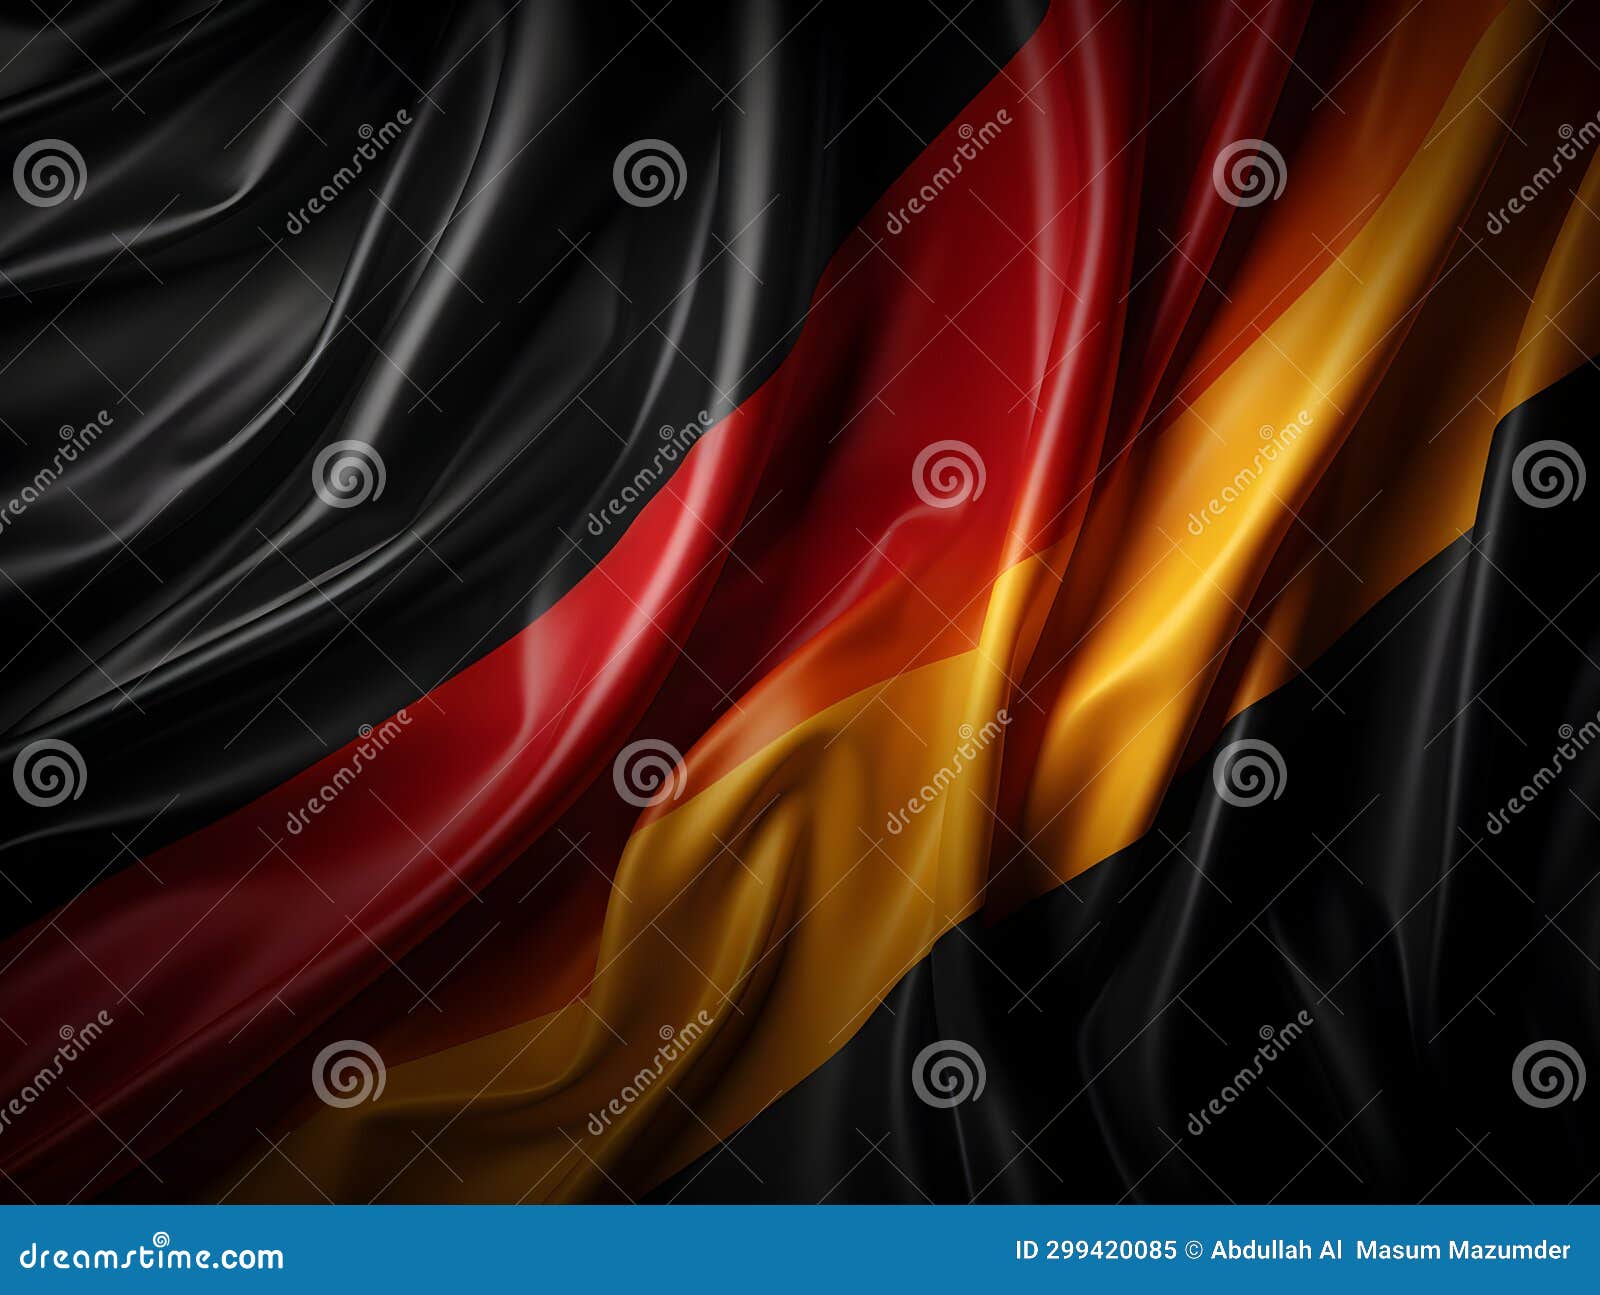 Germany National Flag Background, Germany Flag Weaving Made by Silk ...